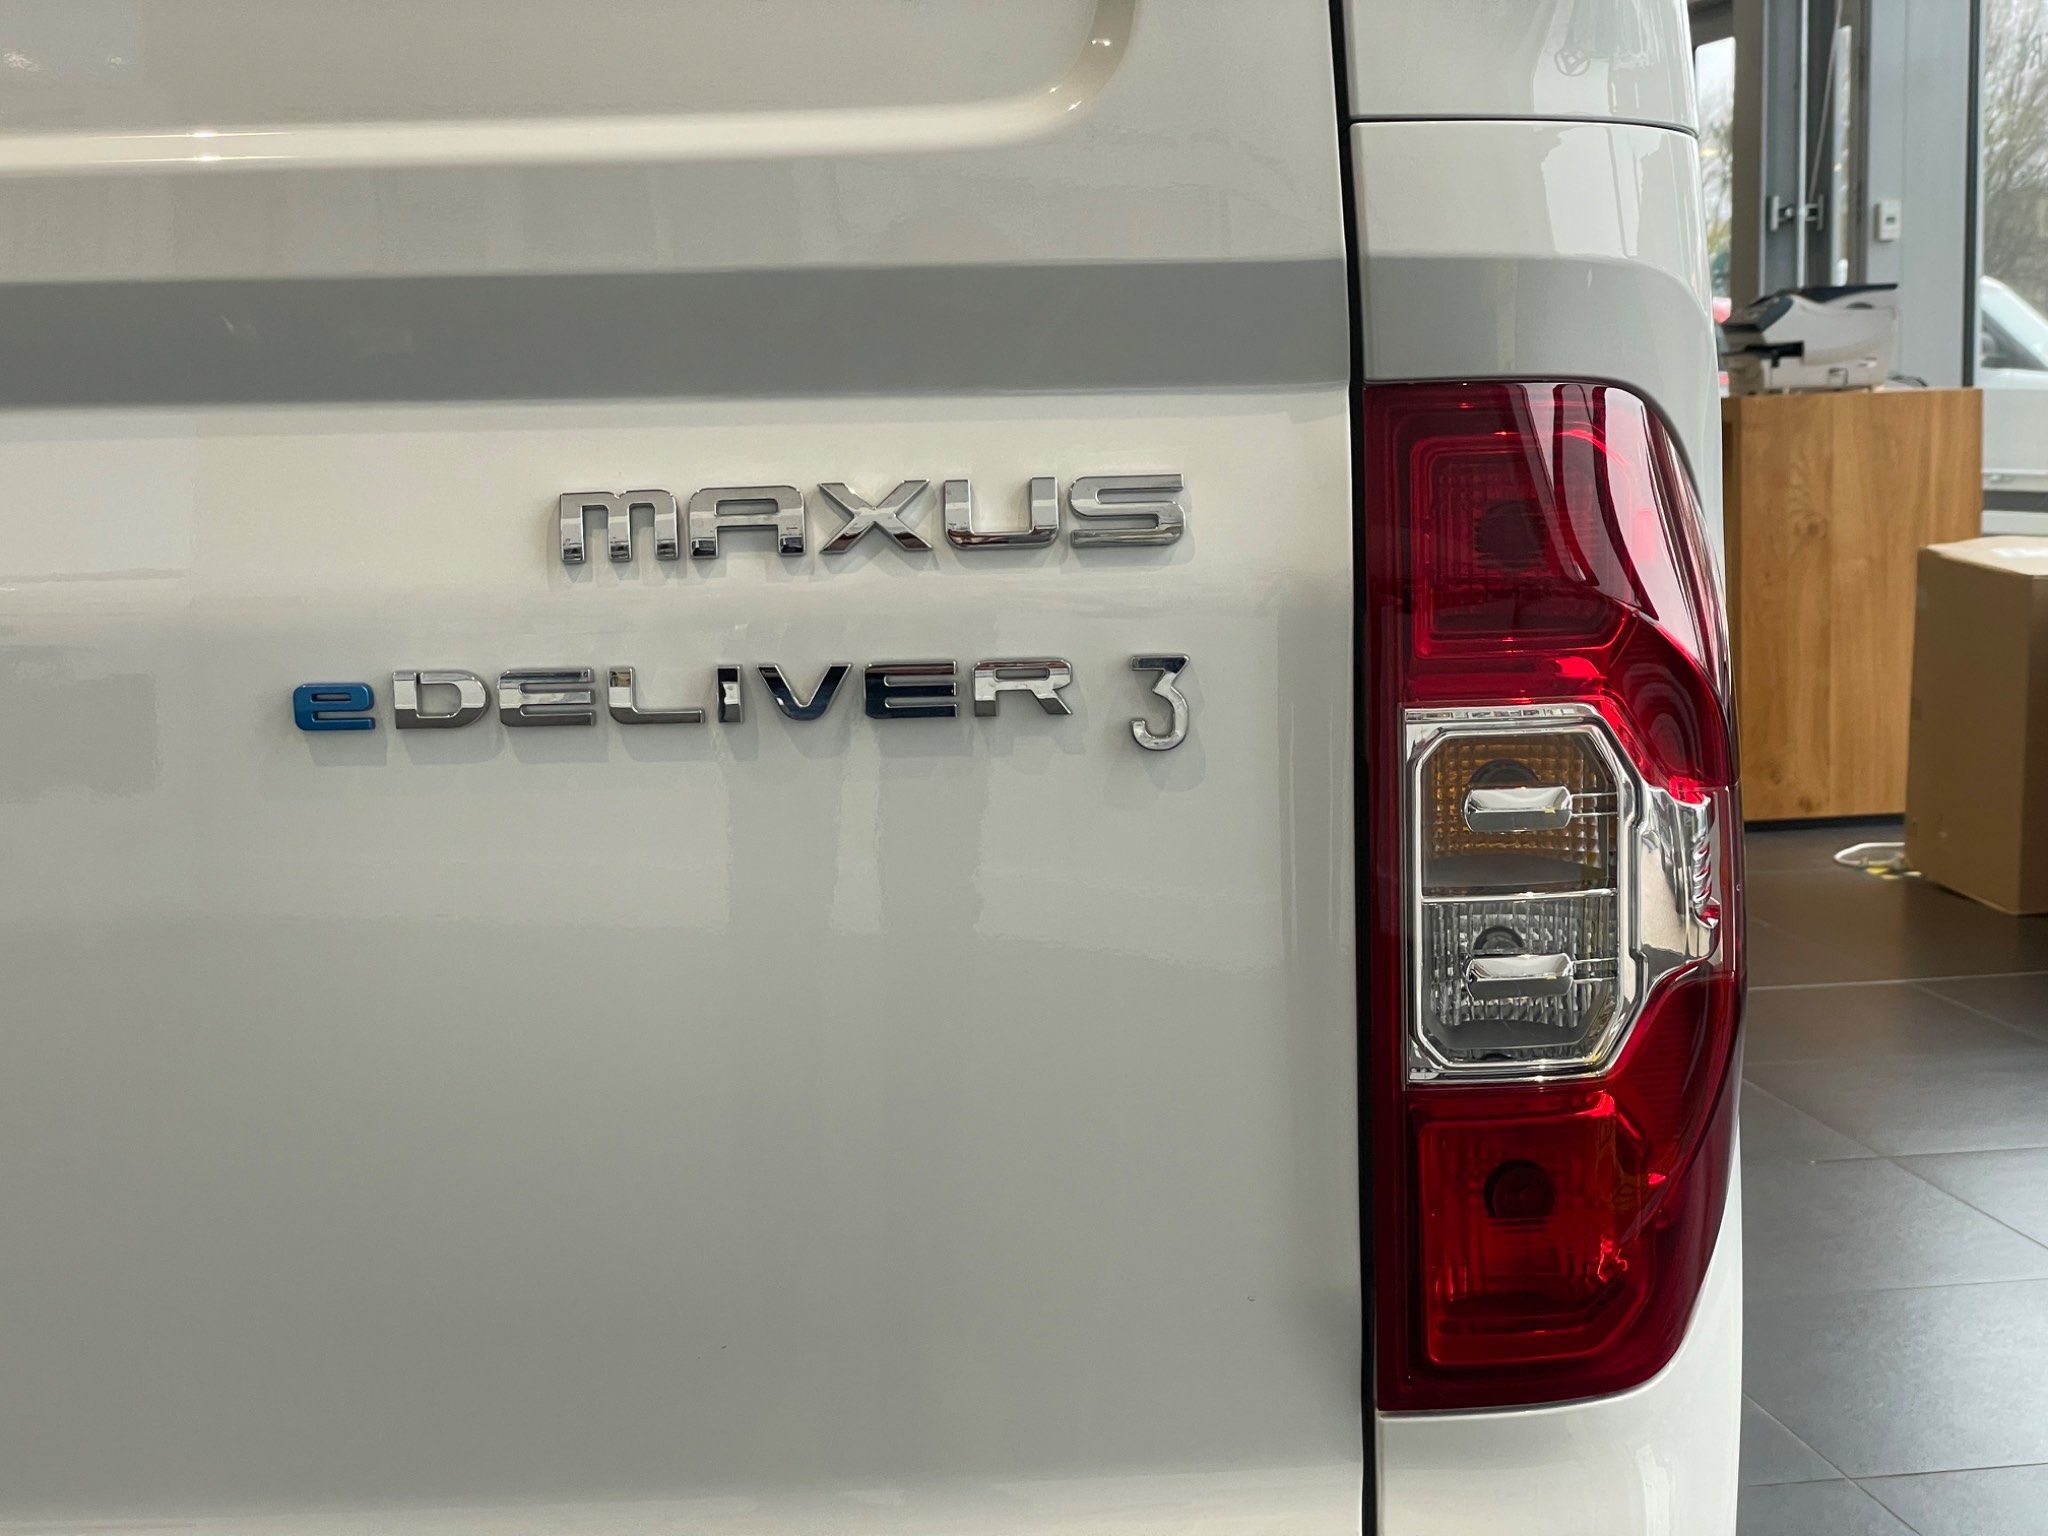 Used MAXUS eDeliver 3